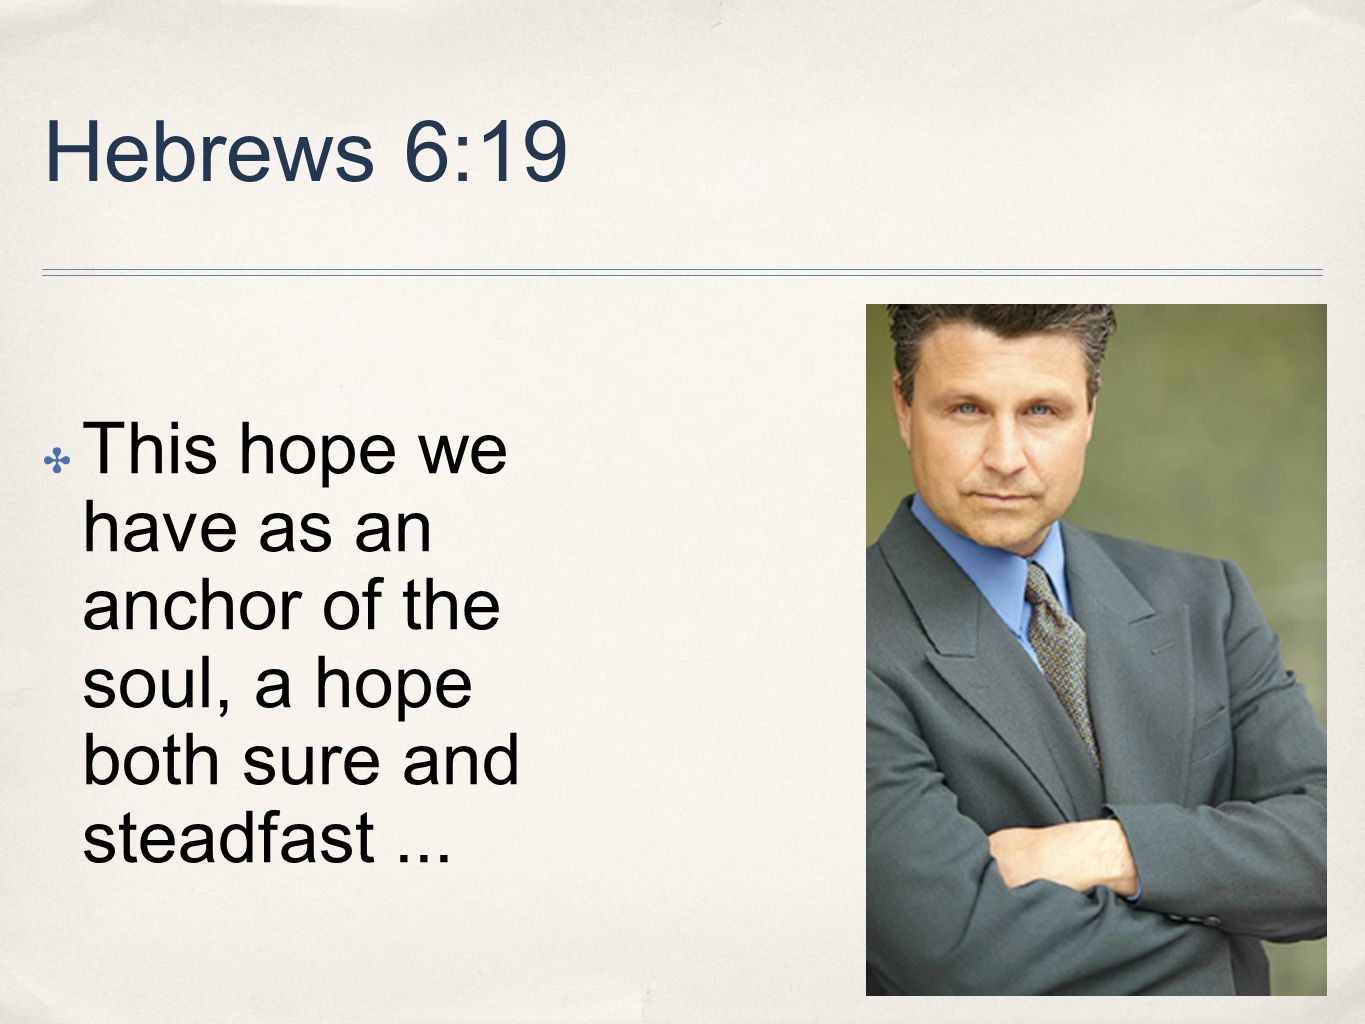 Hebrews 6:19 ✤ This hope we have as an anchor of the soul, a hope both sure and steadfast...